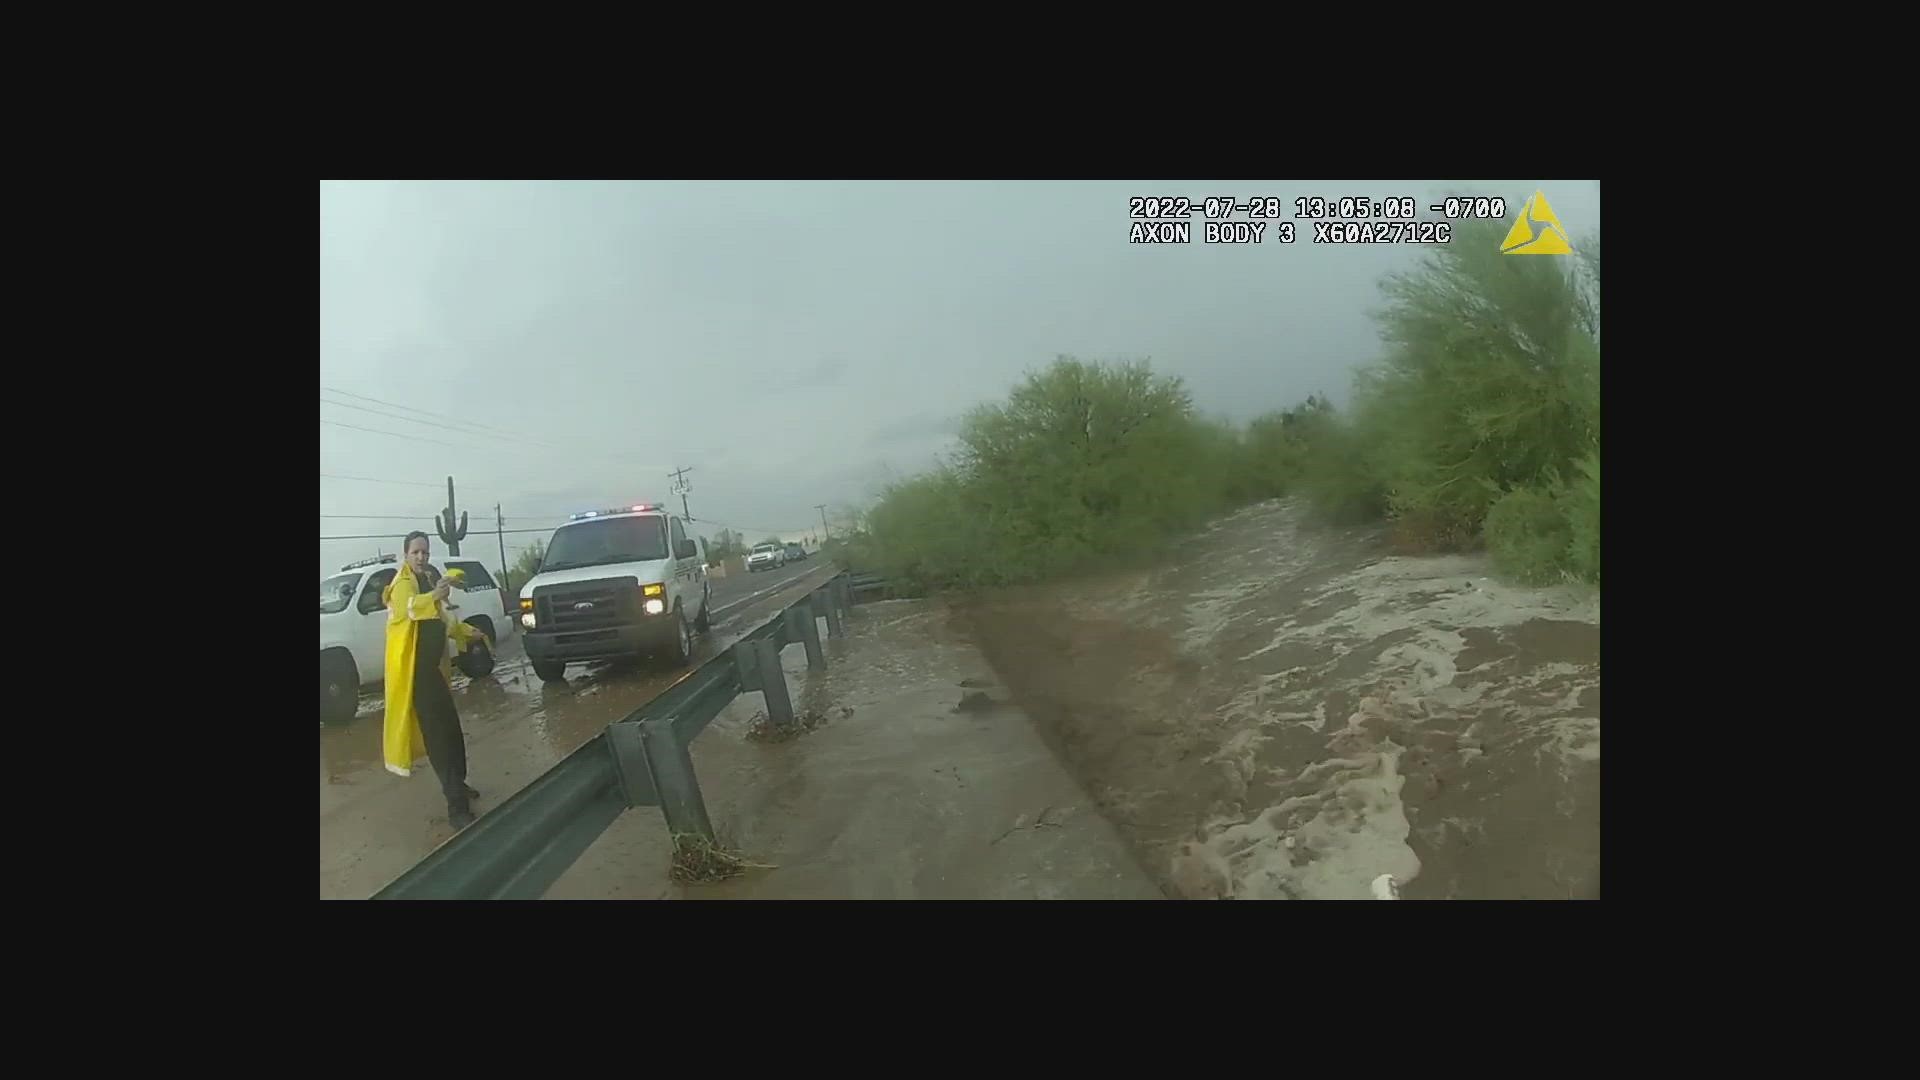 Body camera video shows APJD officers rescuing a woman from her car in Weekes Wash Thursday, July 28.